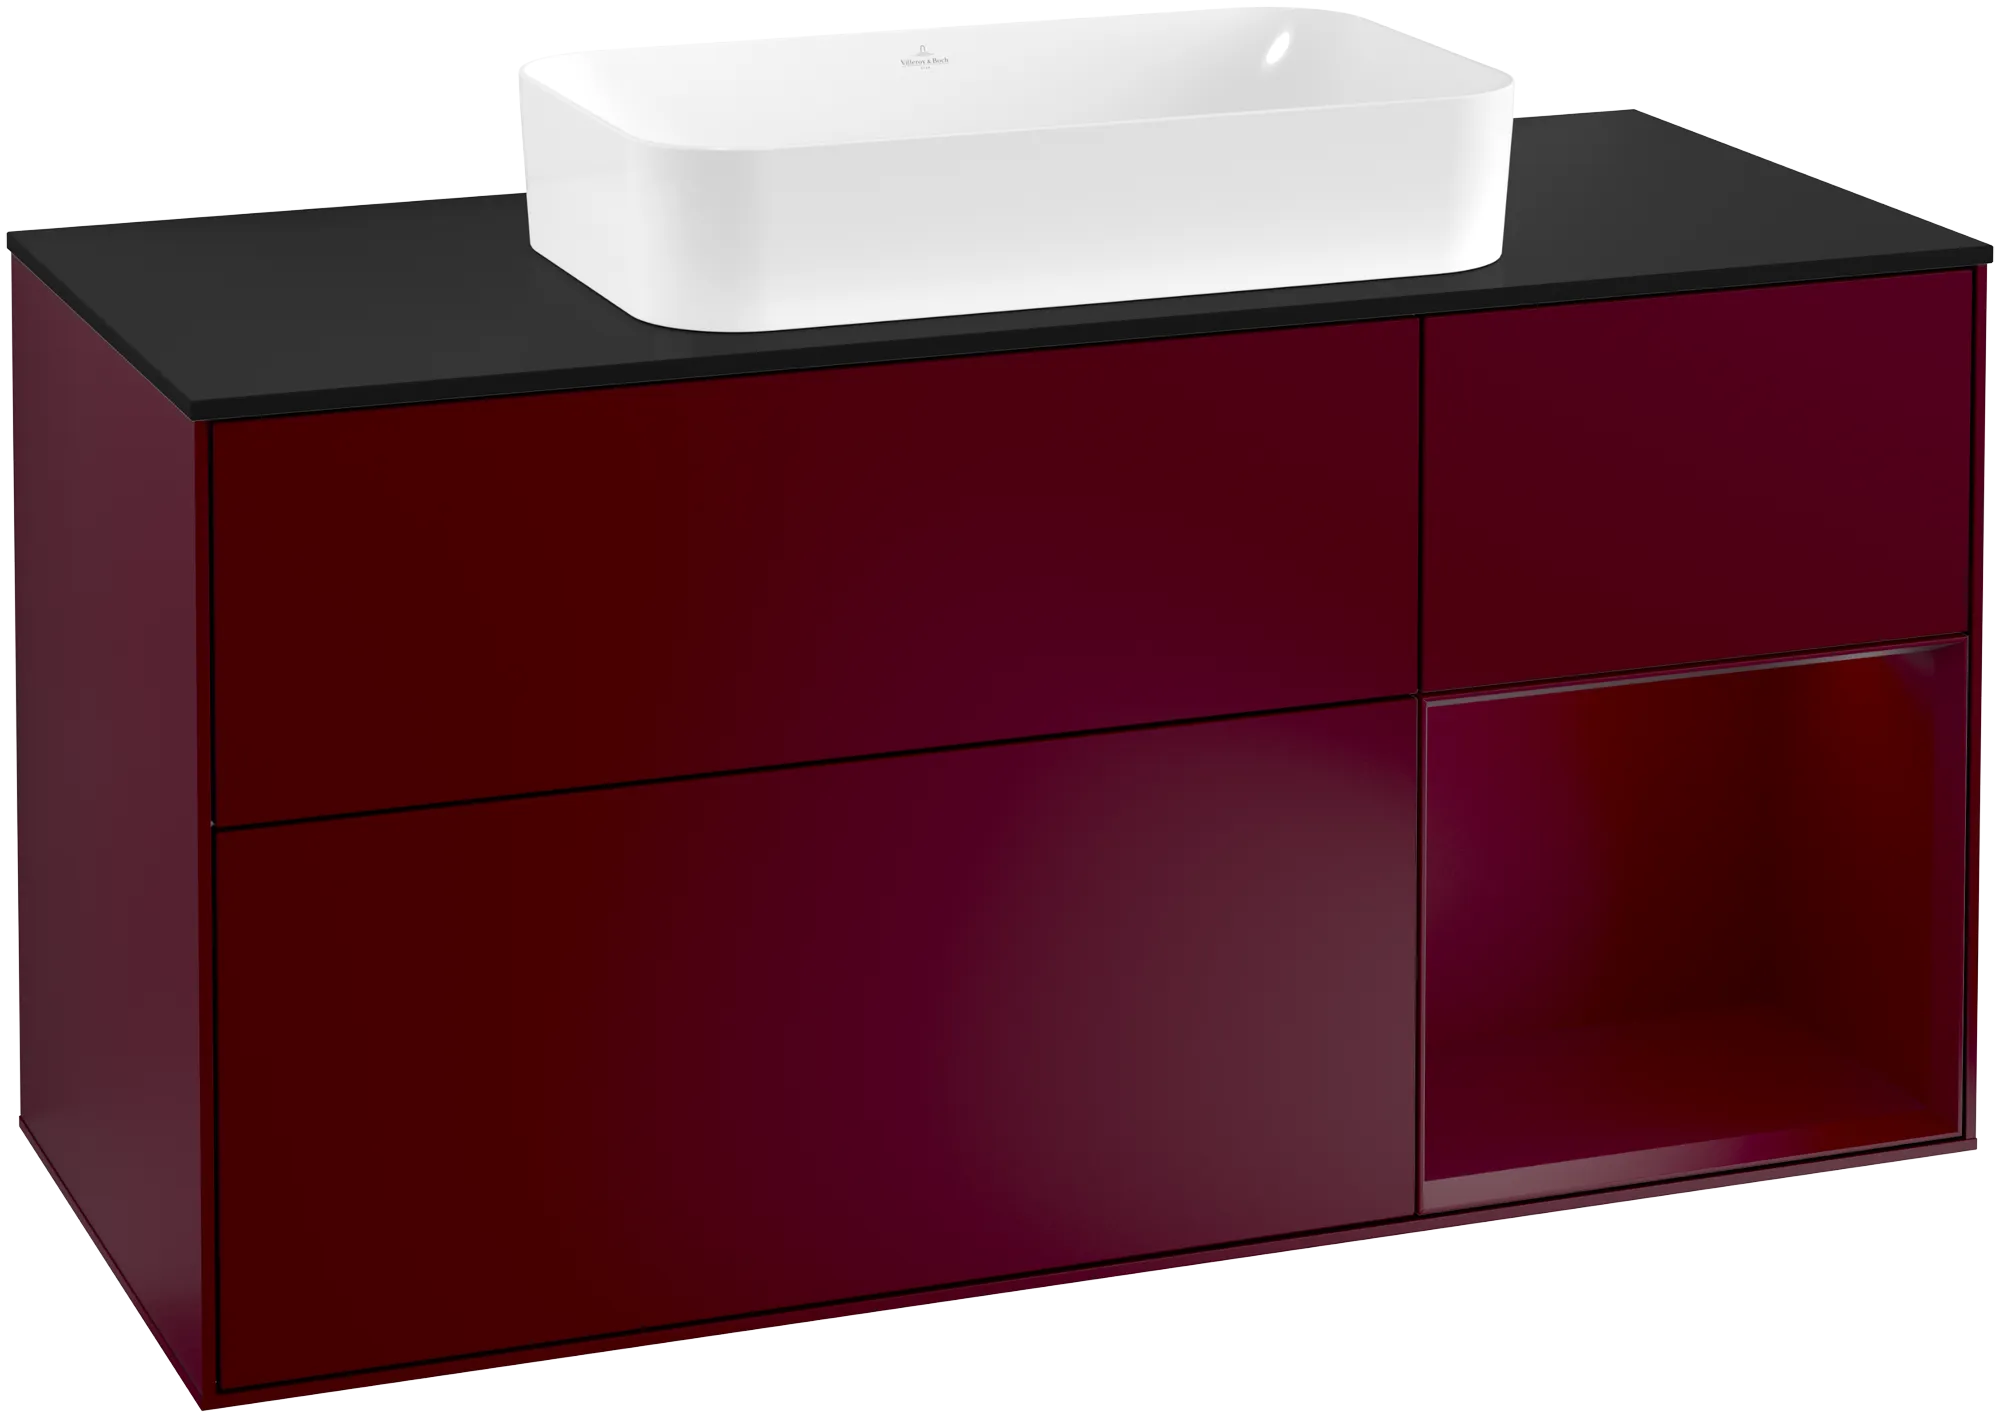 Picture of VILLEROY BOCH Finion Vanity unit, with lighting, 3 pull-out compartments, 1200 x 603 x 501 mm, Peony Matt Lacquer / Peony Matt Lacquer / Glass Black Matt #G302HBHB